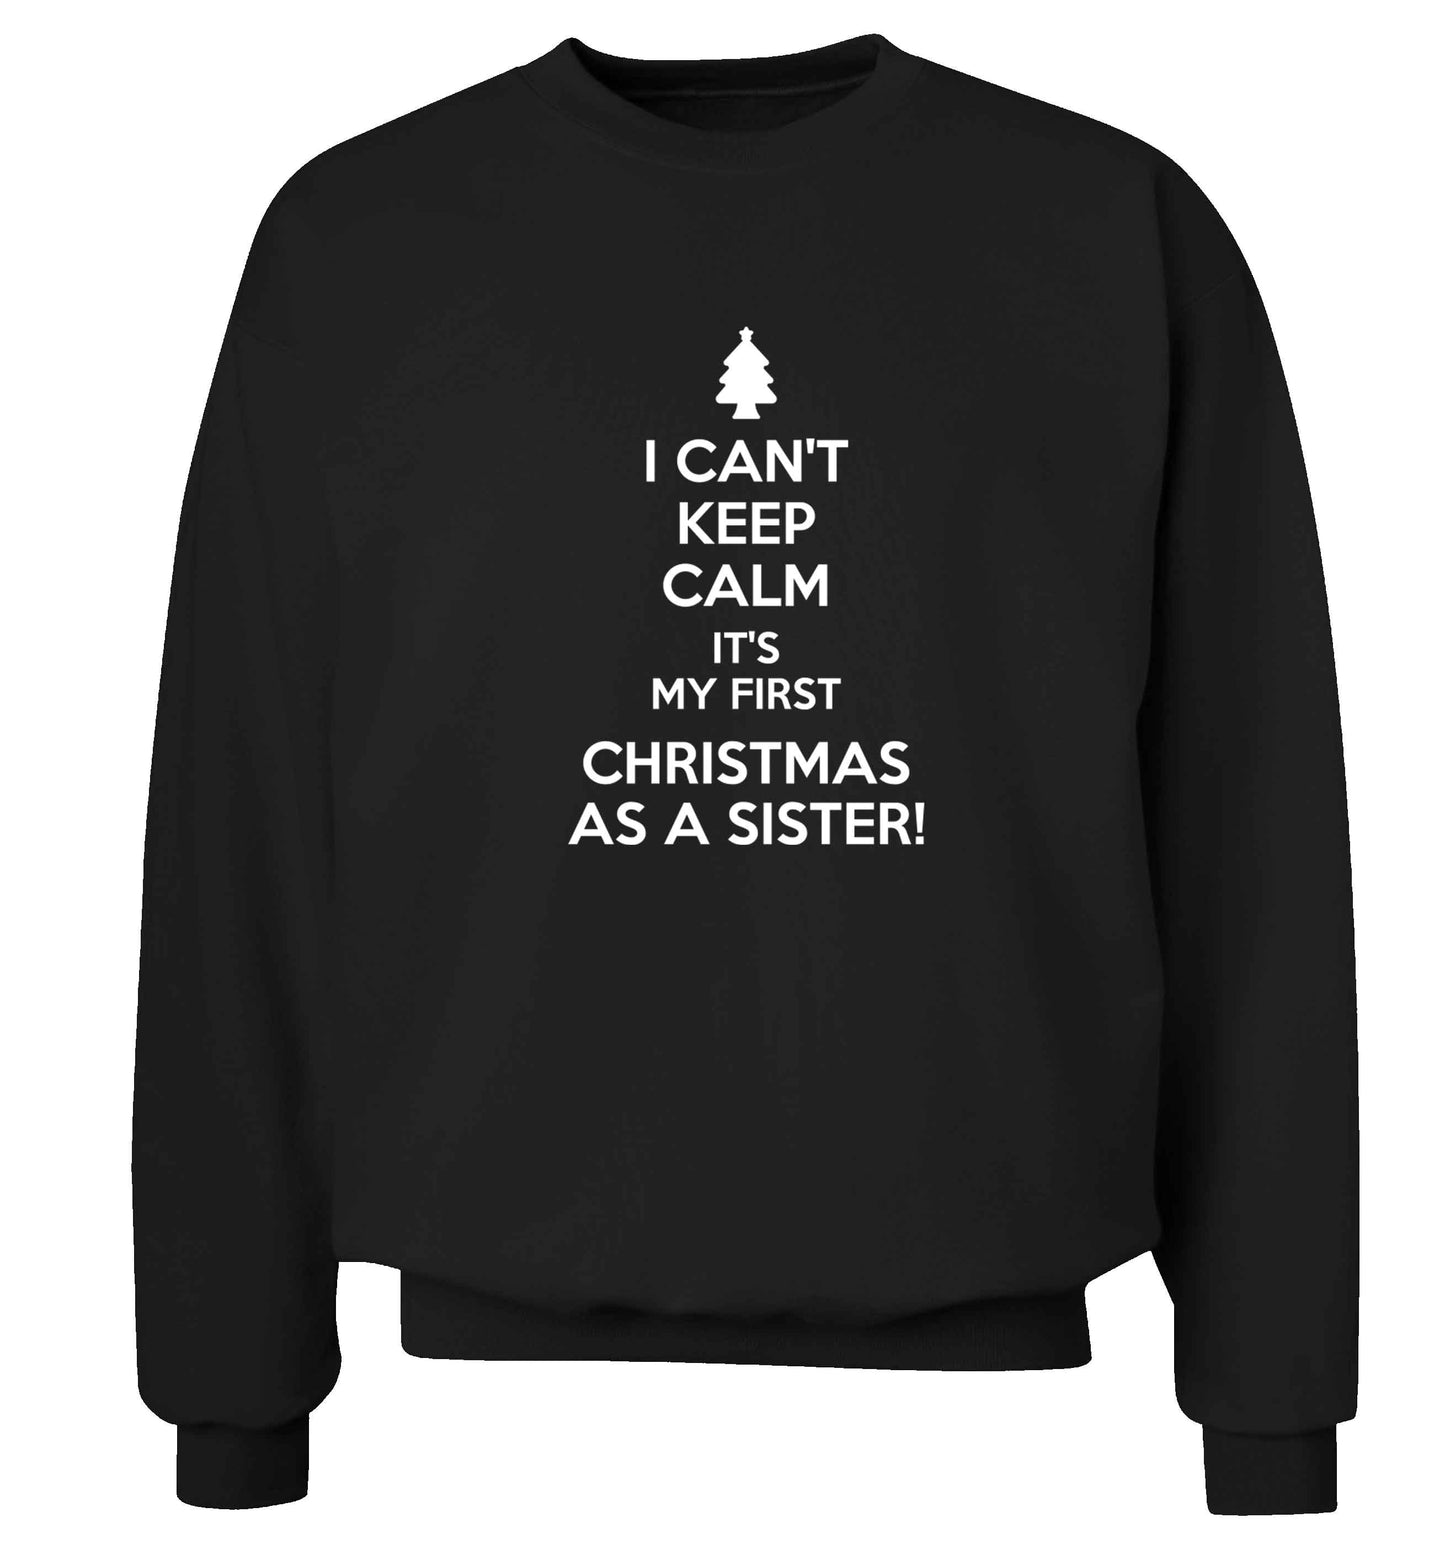 I can't keep calm it's my first Christmas as a sister! Adult's unisex black Sweater 2XL